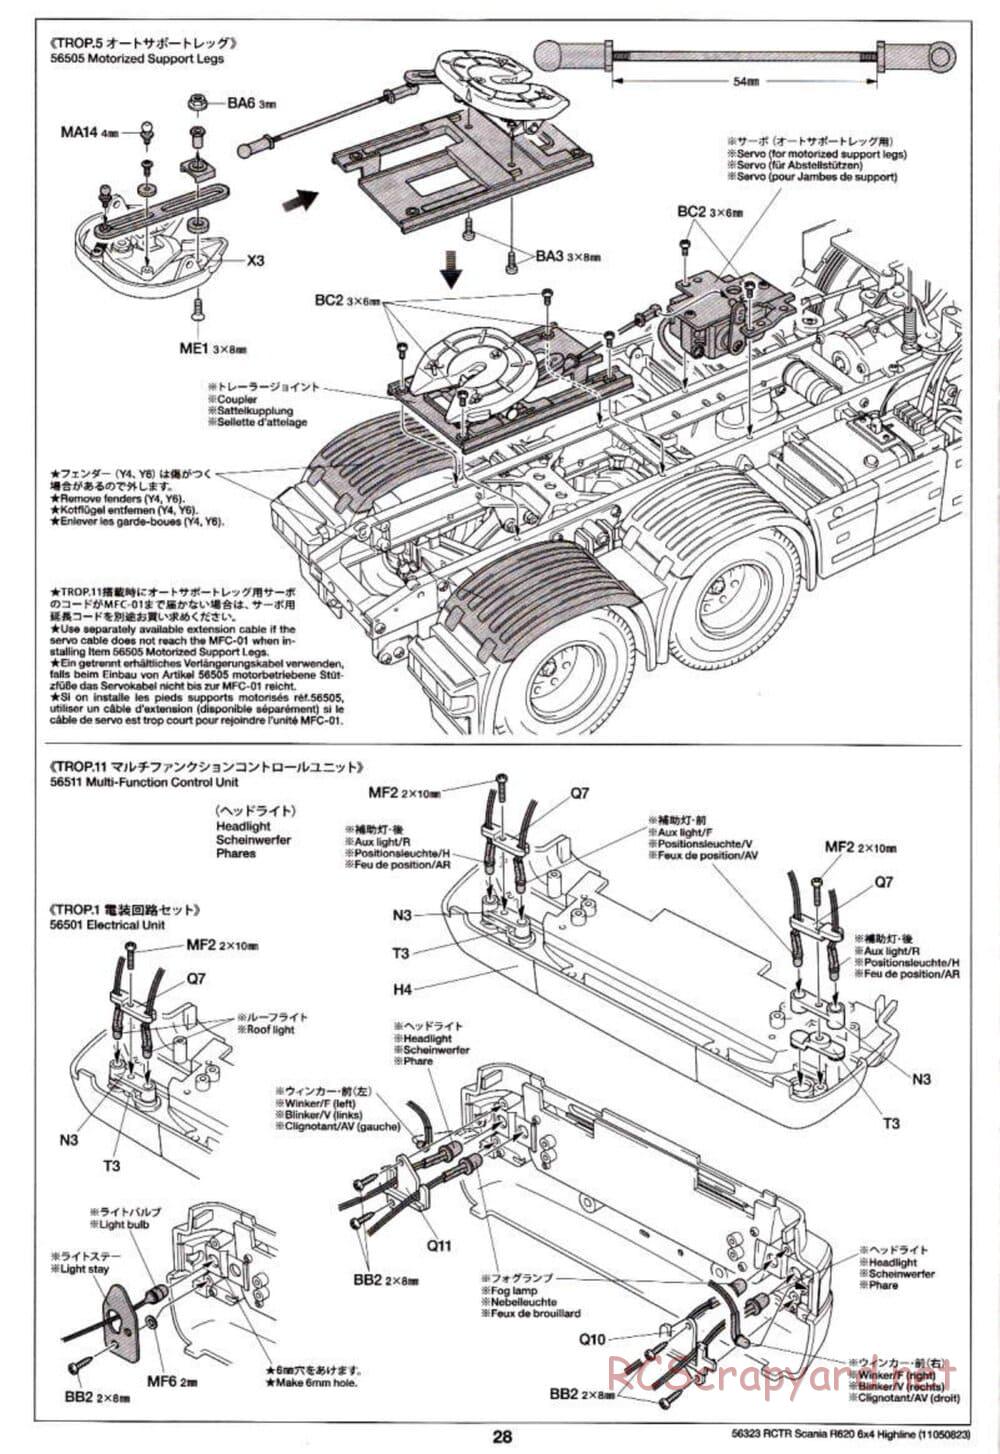 Tamiya - Scania R620 6x4 Highline Tractor Truck Chassis - Manual - Page 28